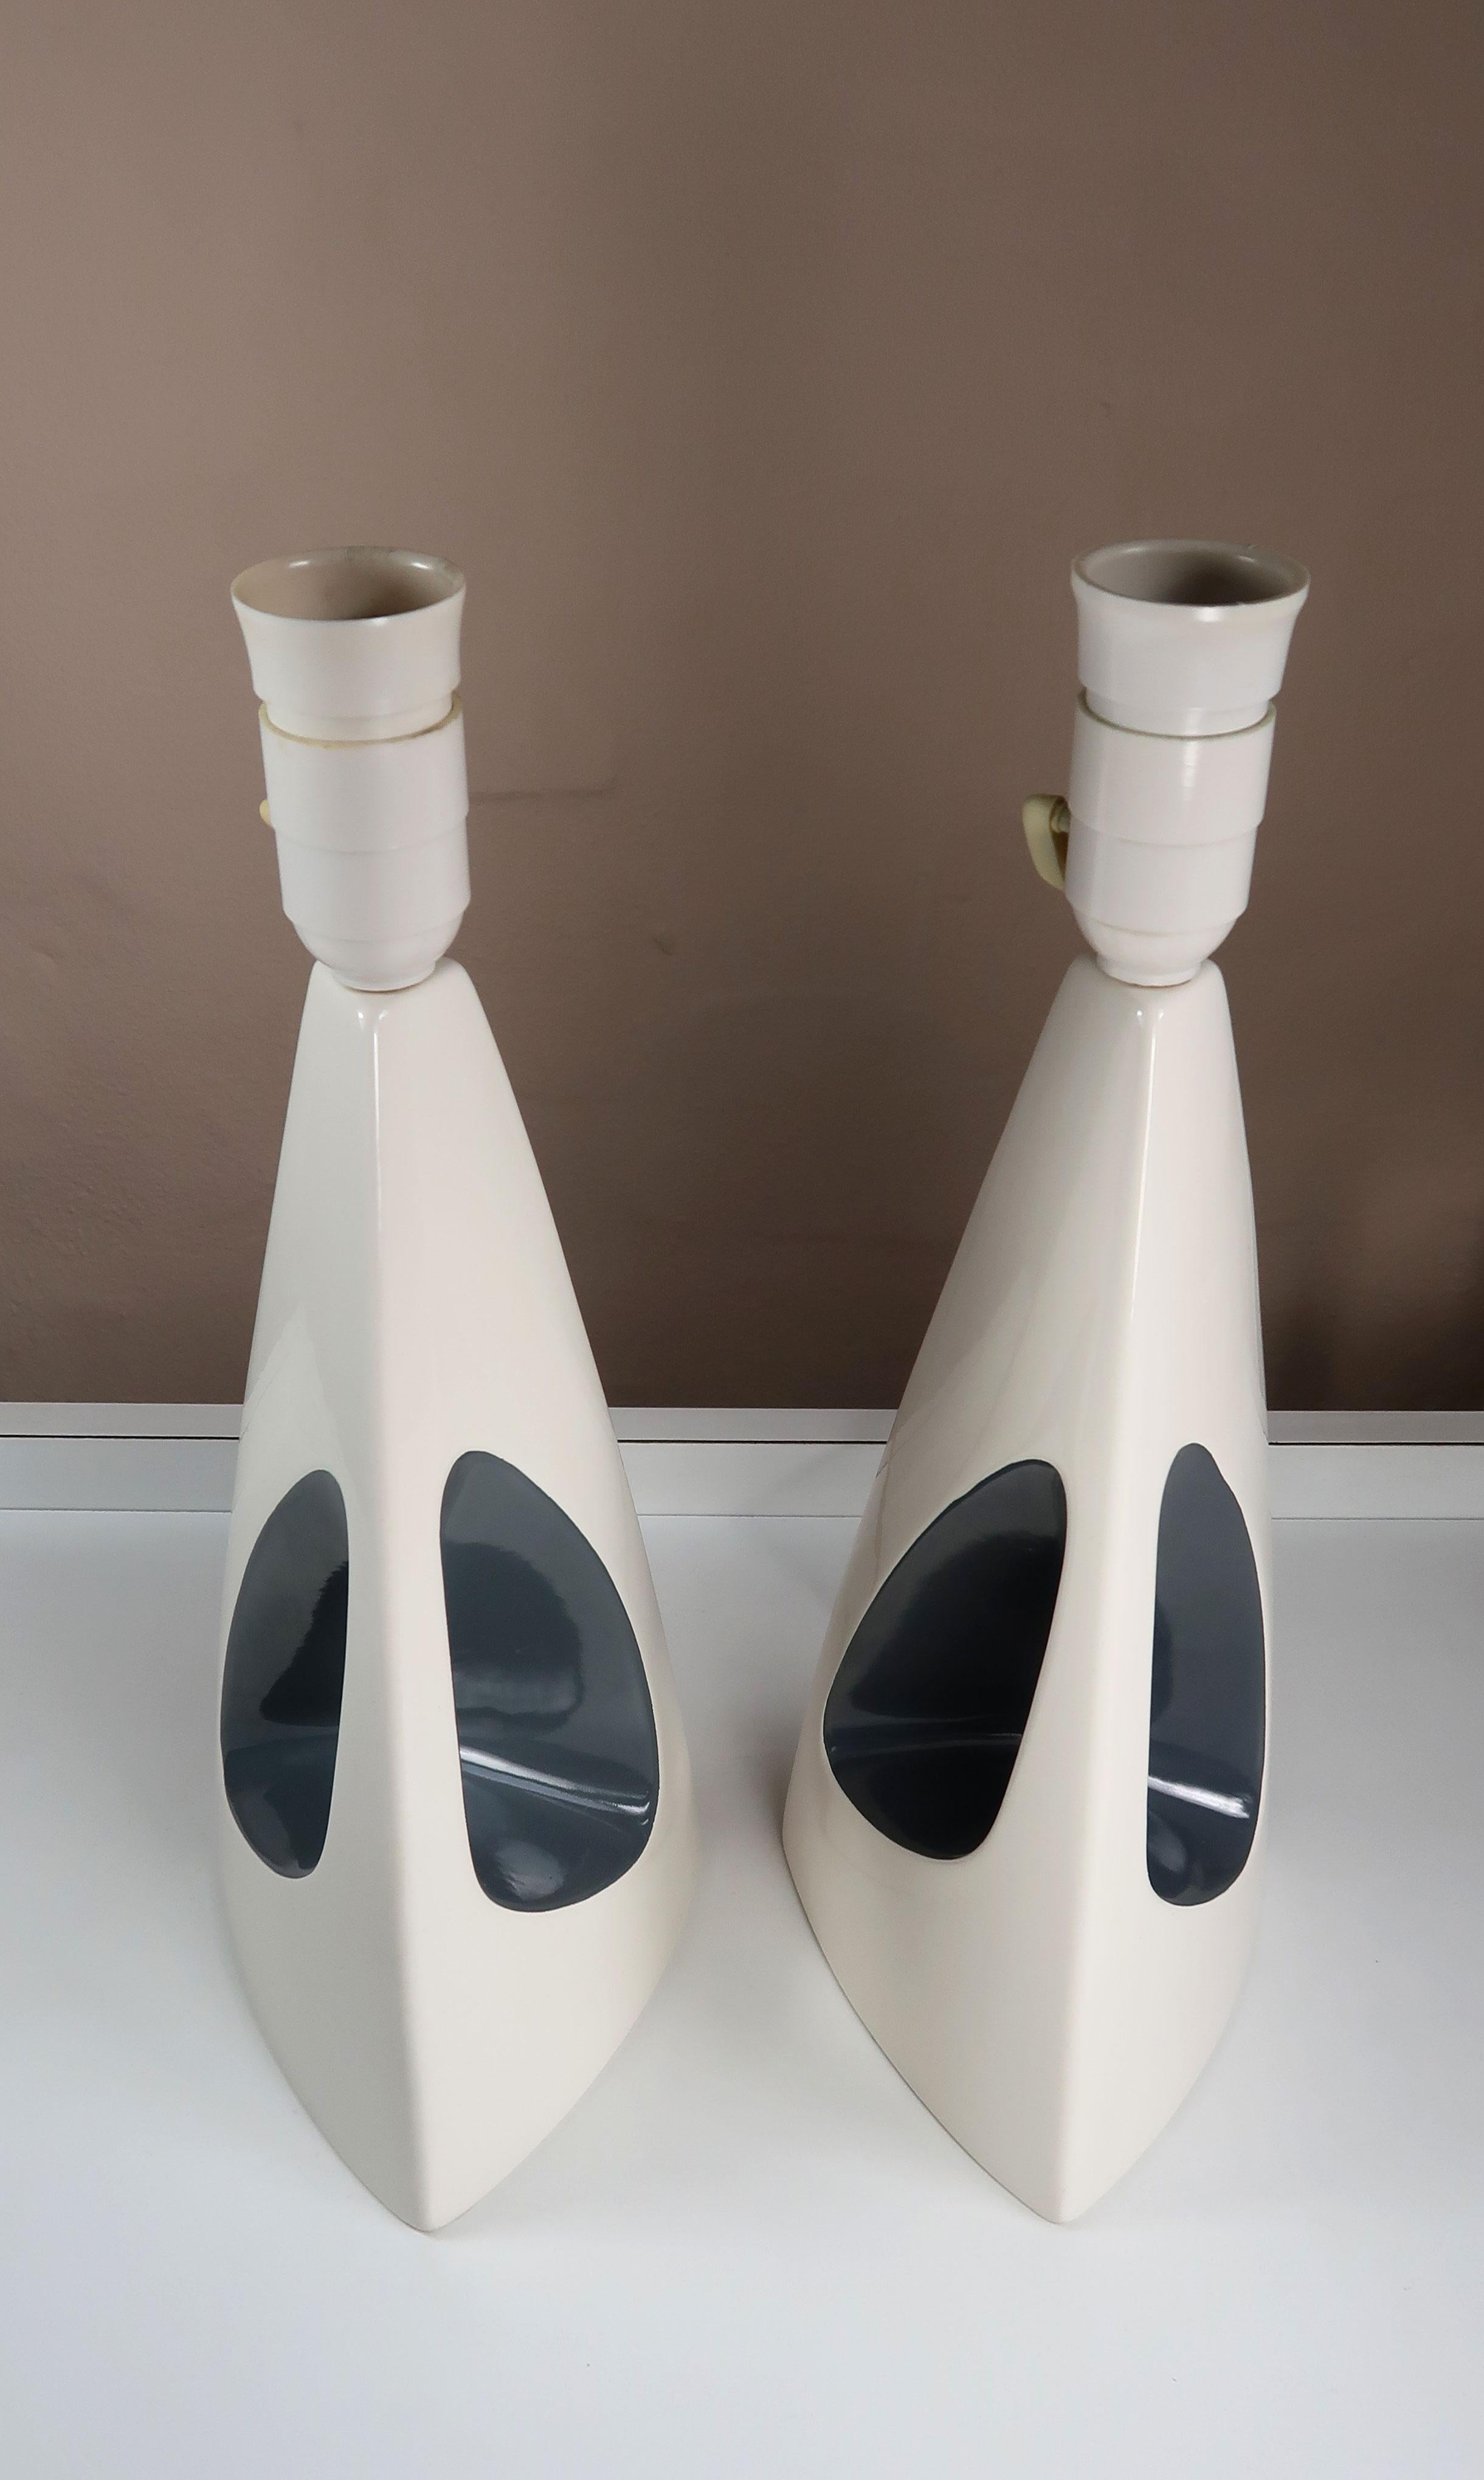 Søholm 1960s Minimalist White, Anthracite Porcelain Table Lamps For Sale 2